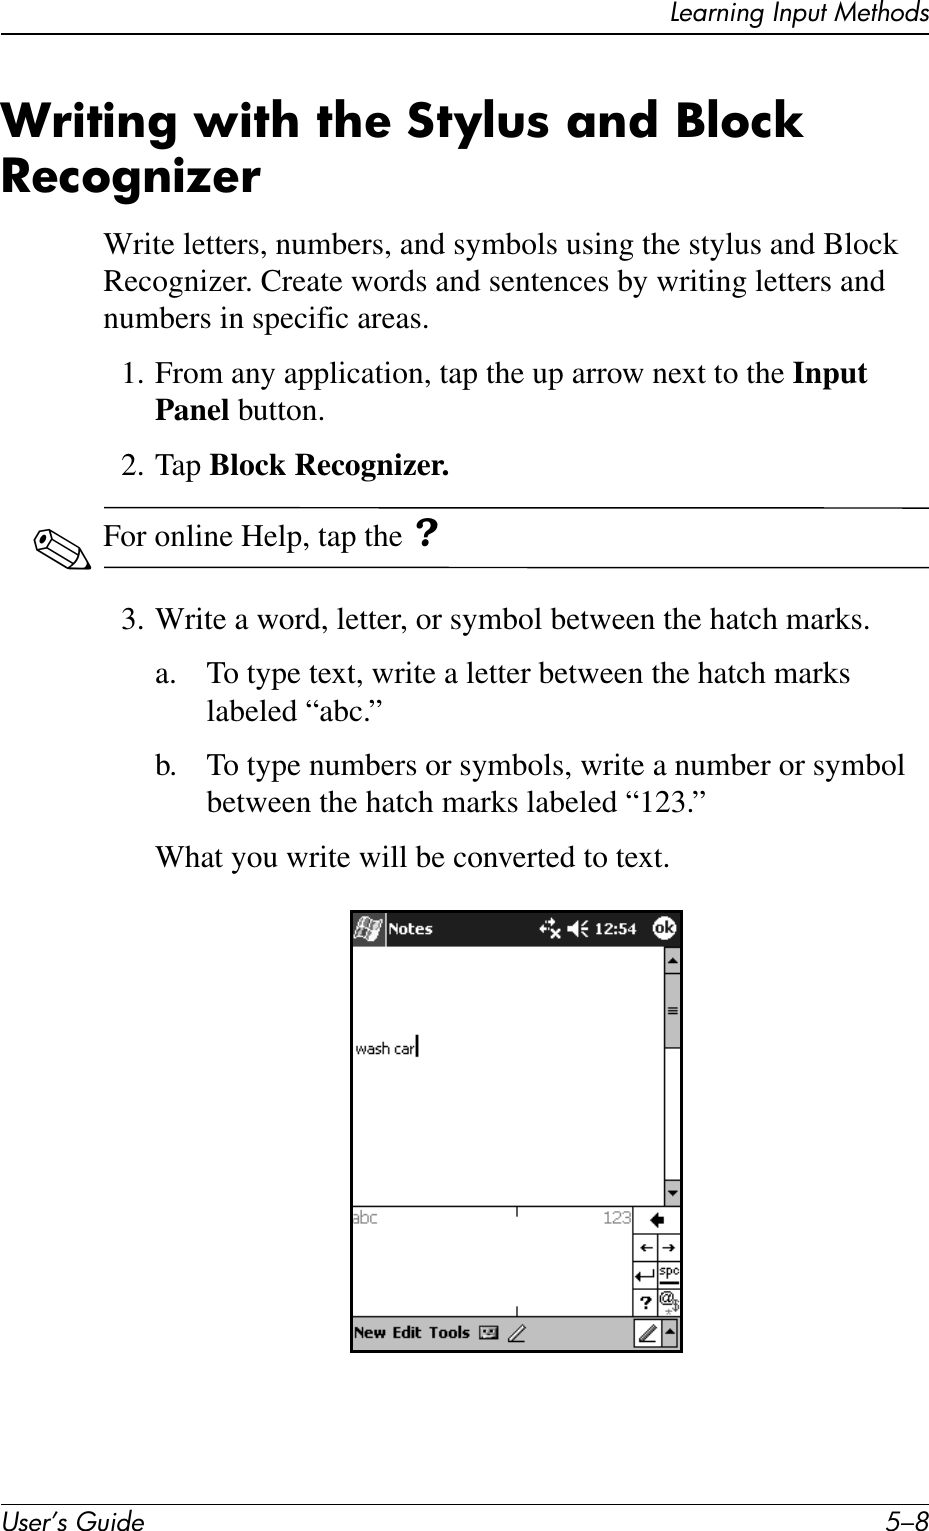 User’s Guide 5–8Learning Input MethodsWriting with the Stylus and Block RecognizerWrite letters, numbers, and symbols using the stylus and Block Recognizer. Create words and sentences by writing letters and numbers in specific areas.1. From any application, tap the up arrow next to the Input Panel button.2. Tap Block Recognizer.✎For online Help, tap the ?3. Write a word, letter, or symbol between the hatch marks.a. To type text, write a letter between the hatch marks labeled “abc.”b. To type numbers or symbols, write a number or symbol between the hatch marks labeled “123.”What you write will be converted to text.